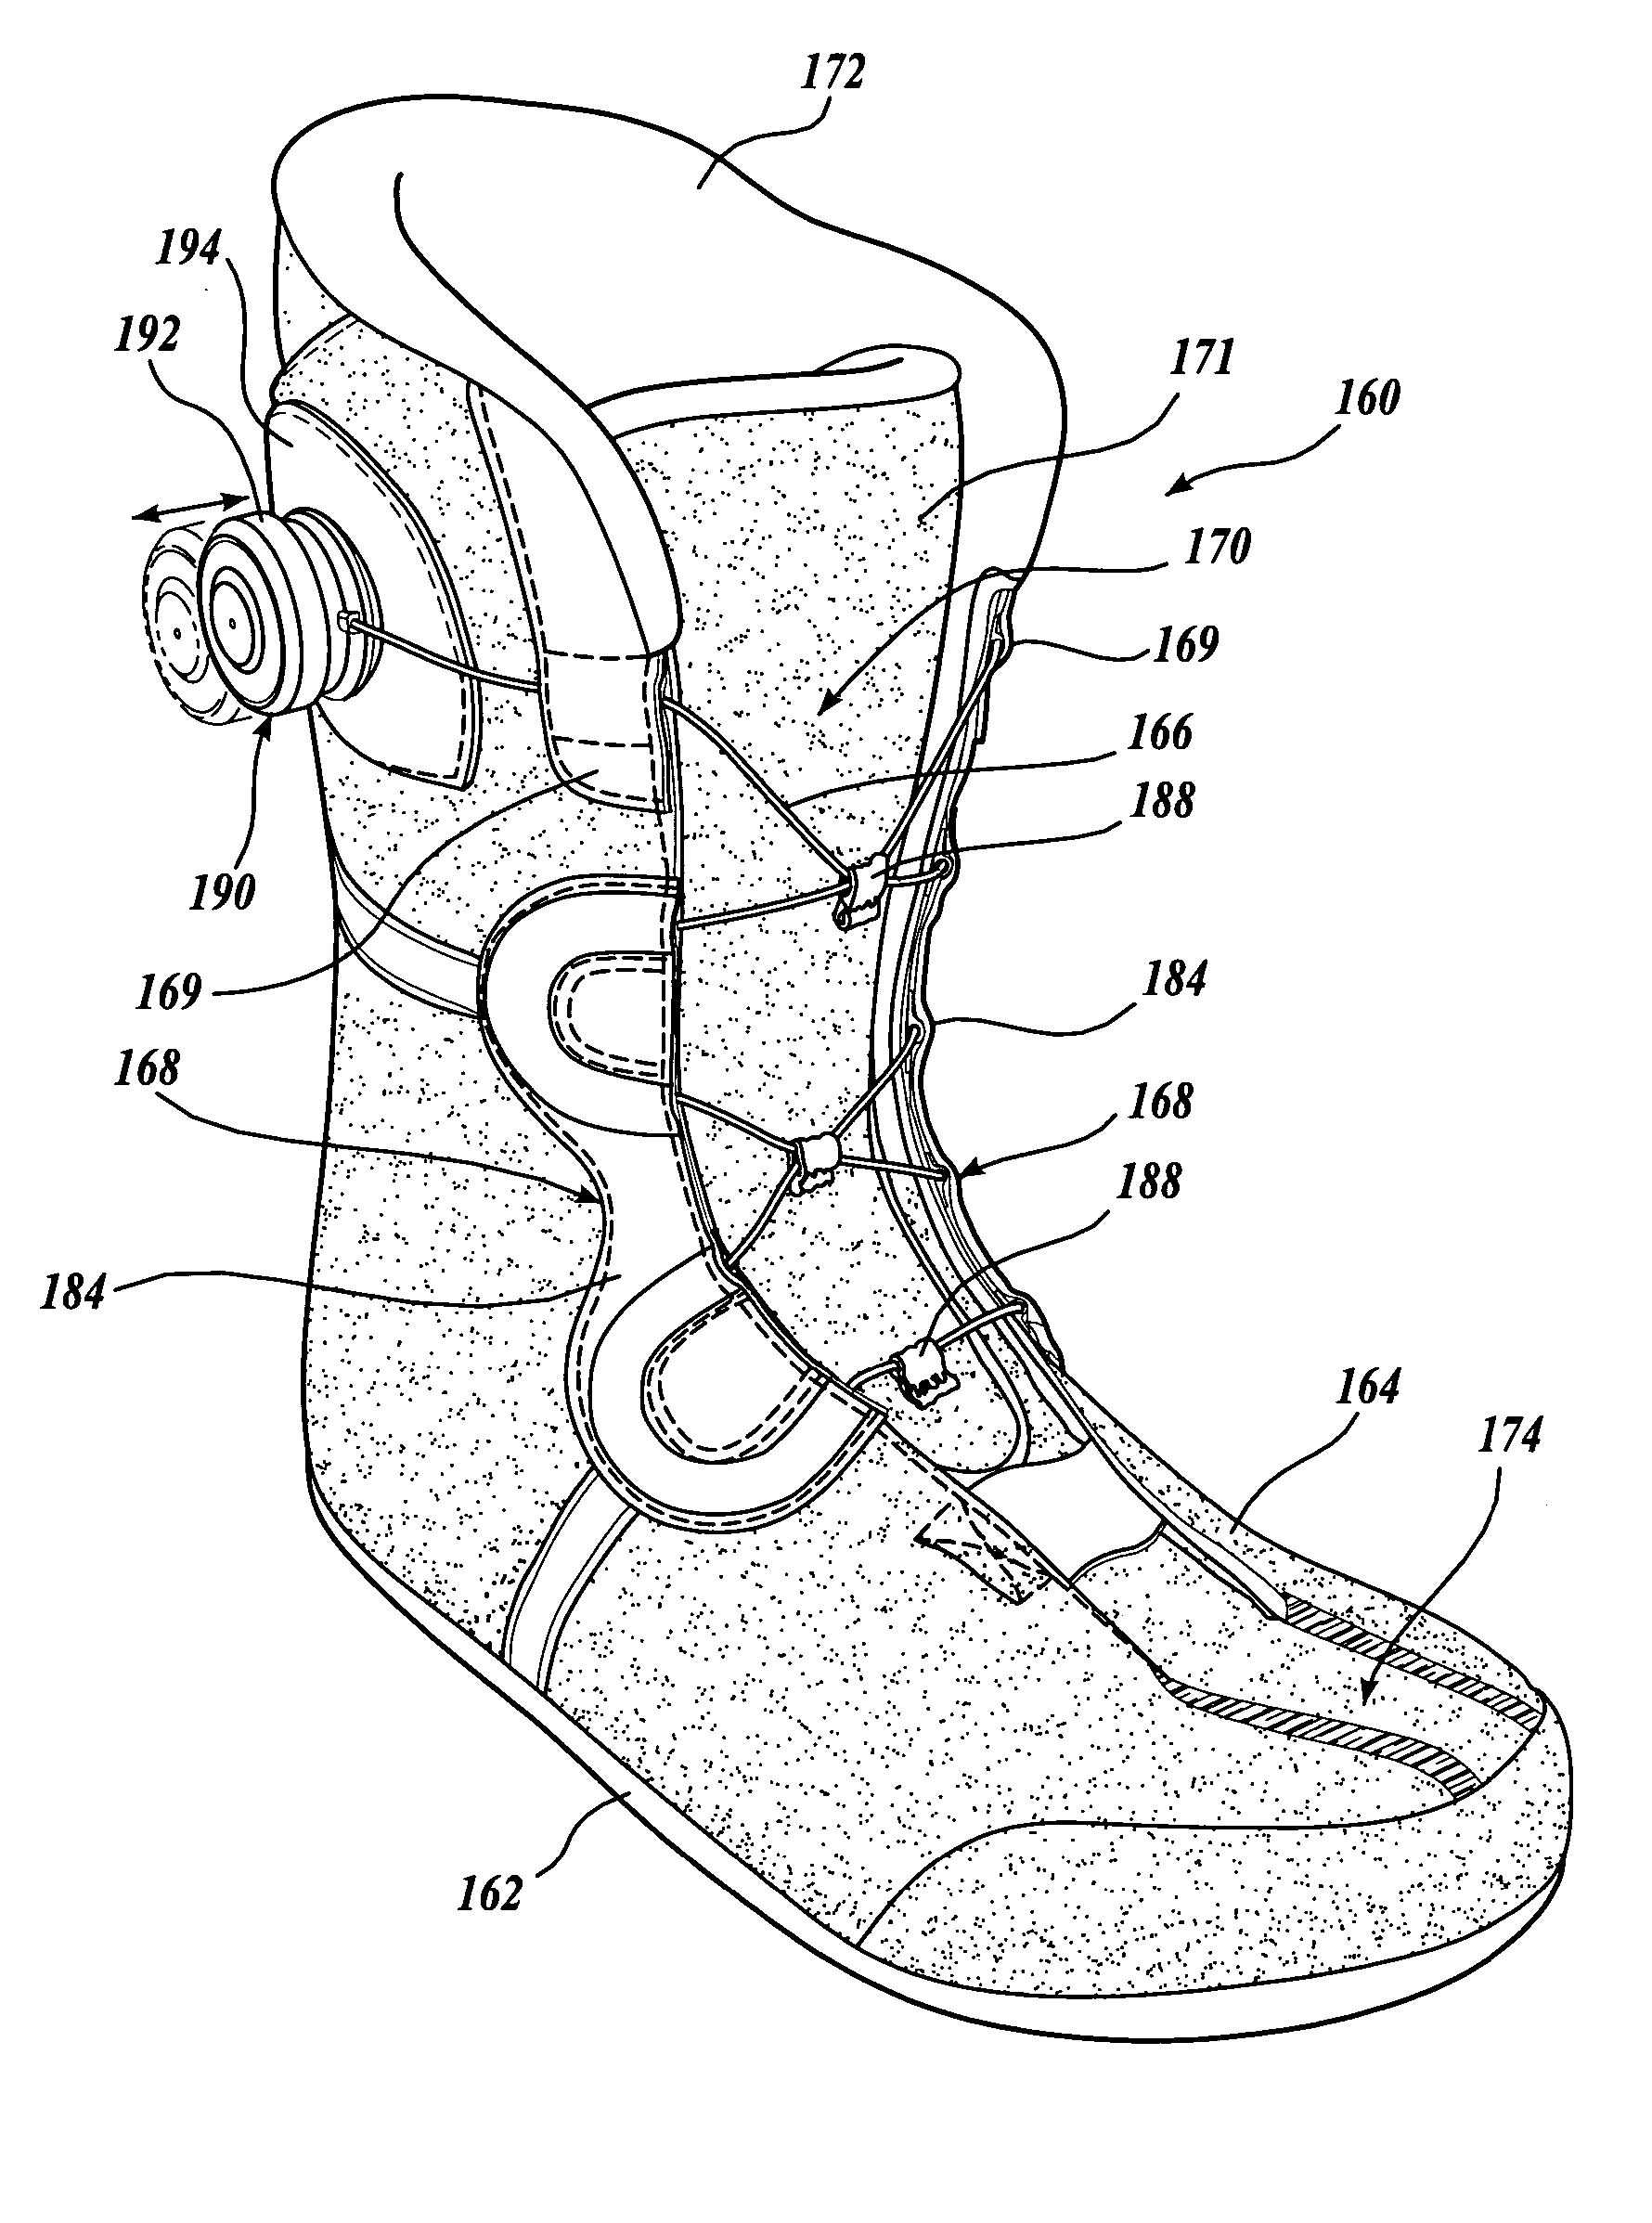 Snowboard boot with liner harness